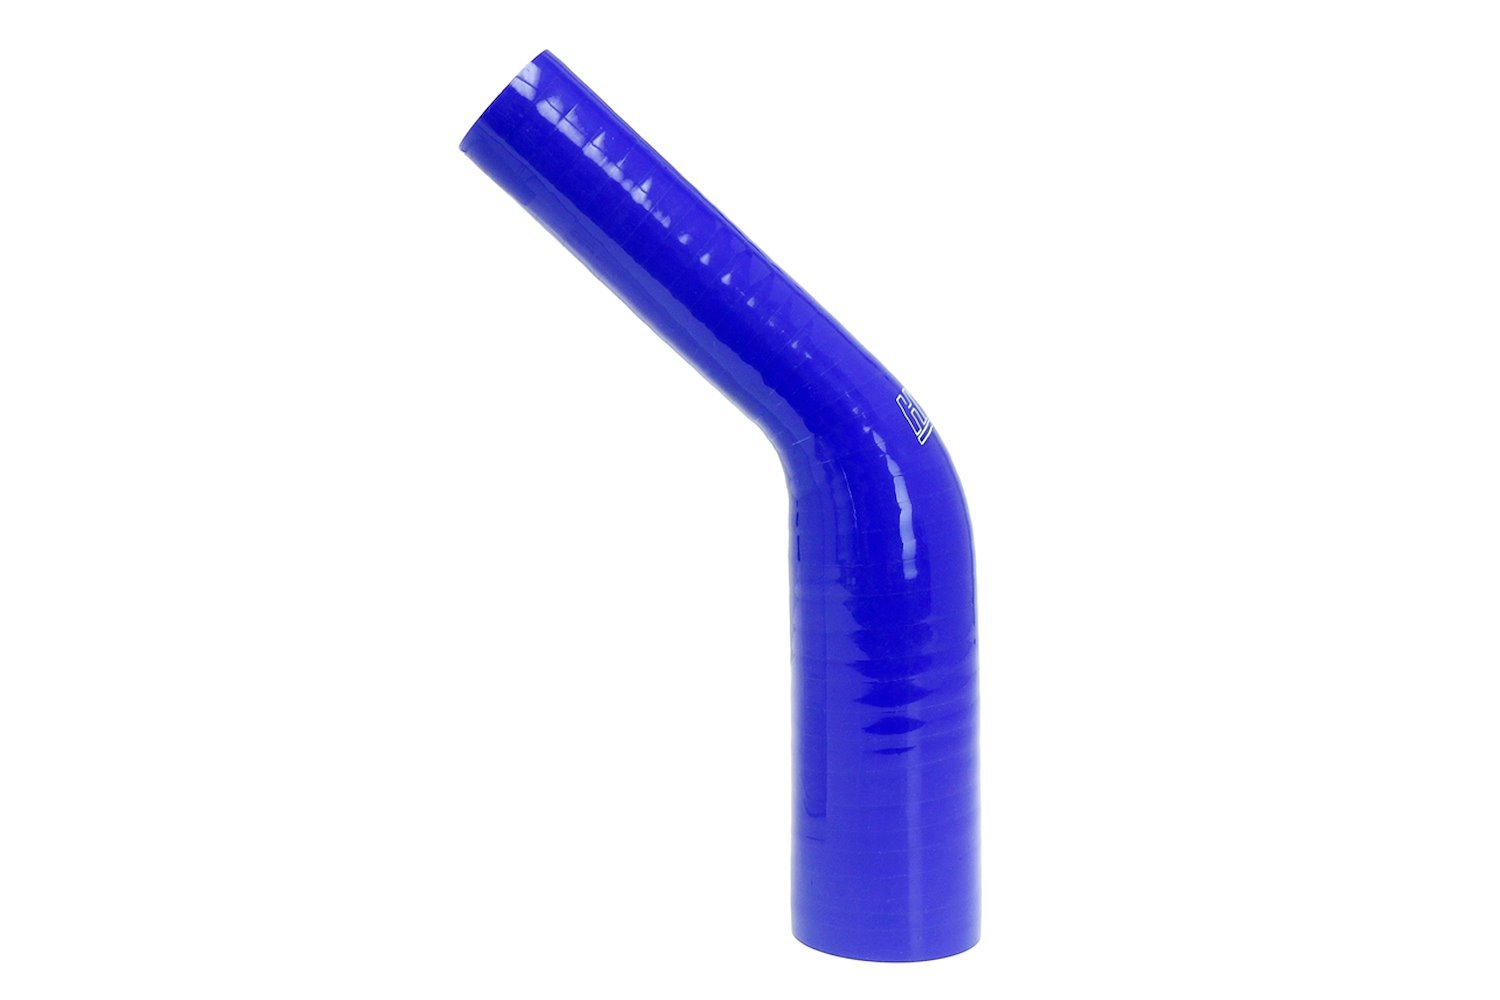 HTSER45-050-062-BLUE Silicone 45-Degree Elbow Hose, High-Temp 4-Ply Reinforced, 1/2 in. - 5/8 in. ID, Blue